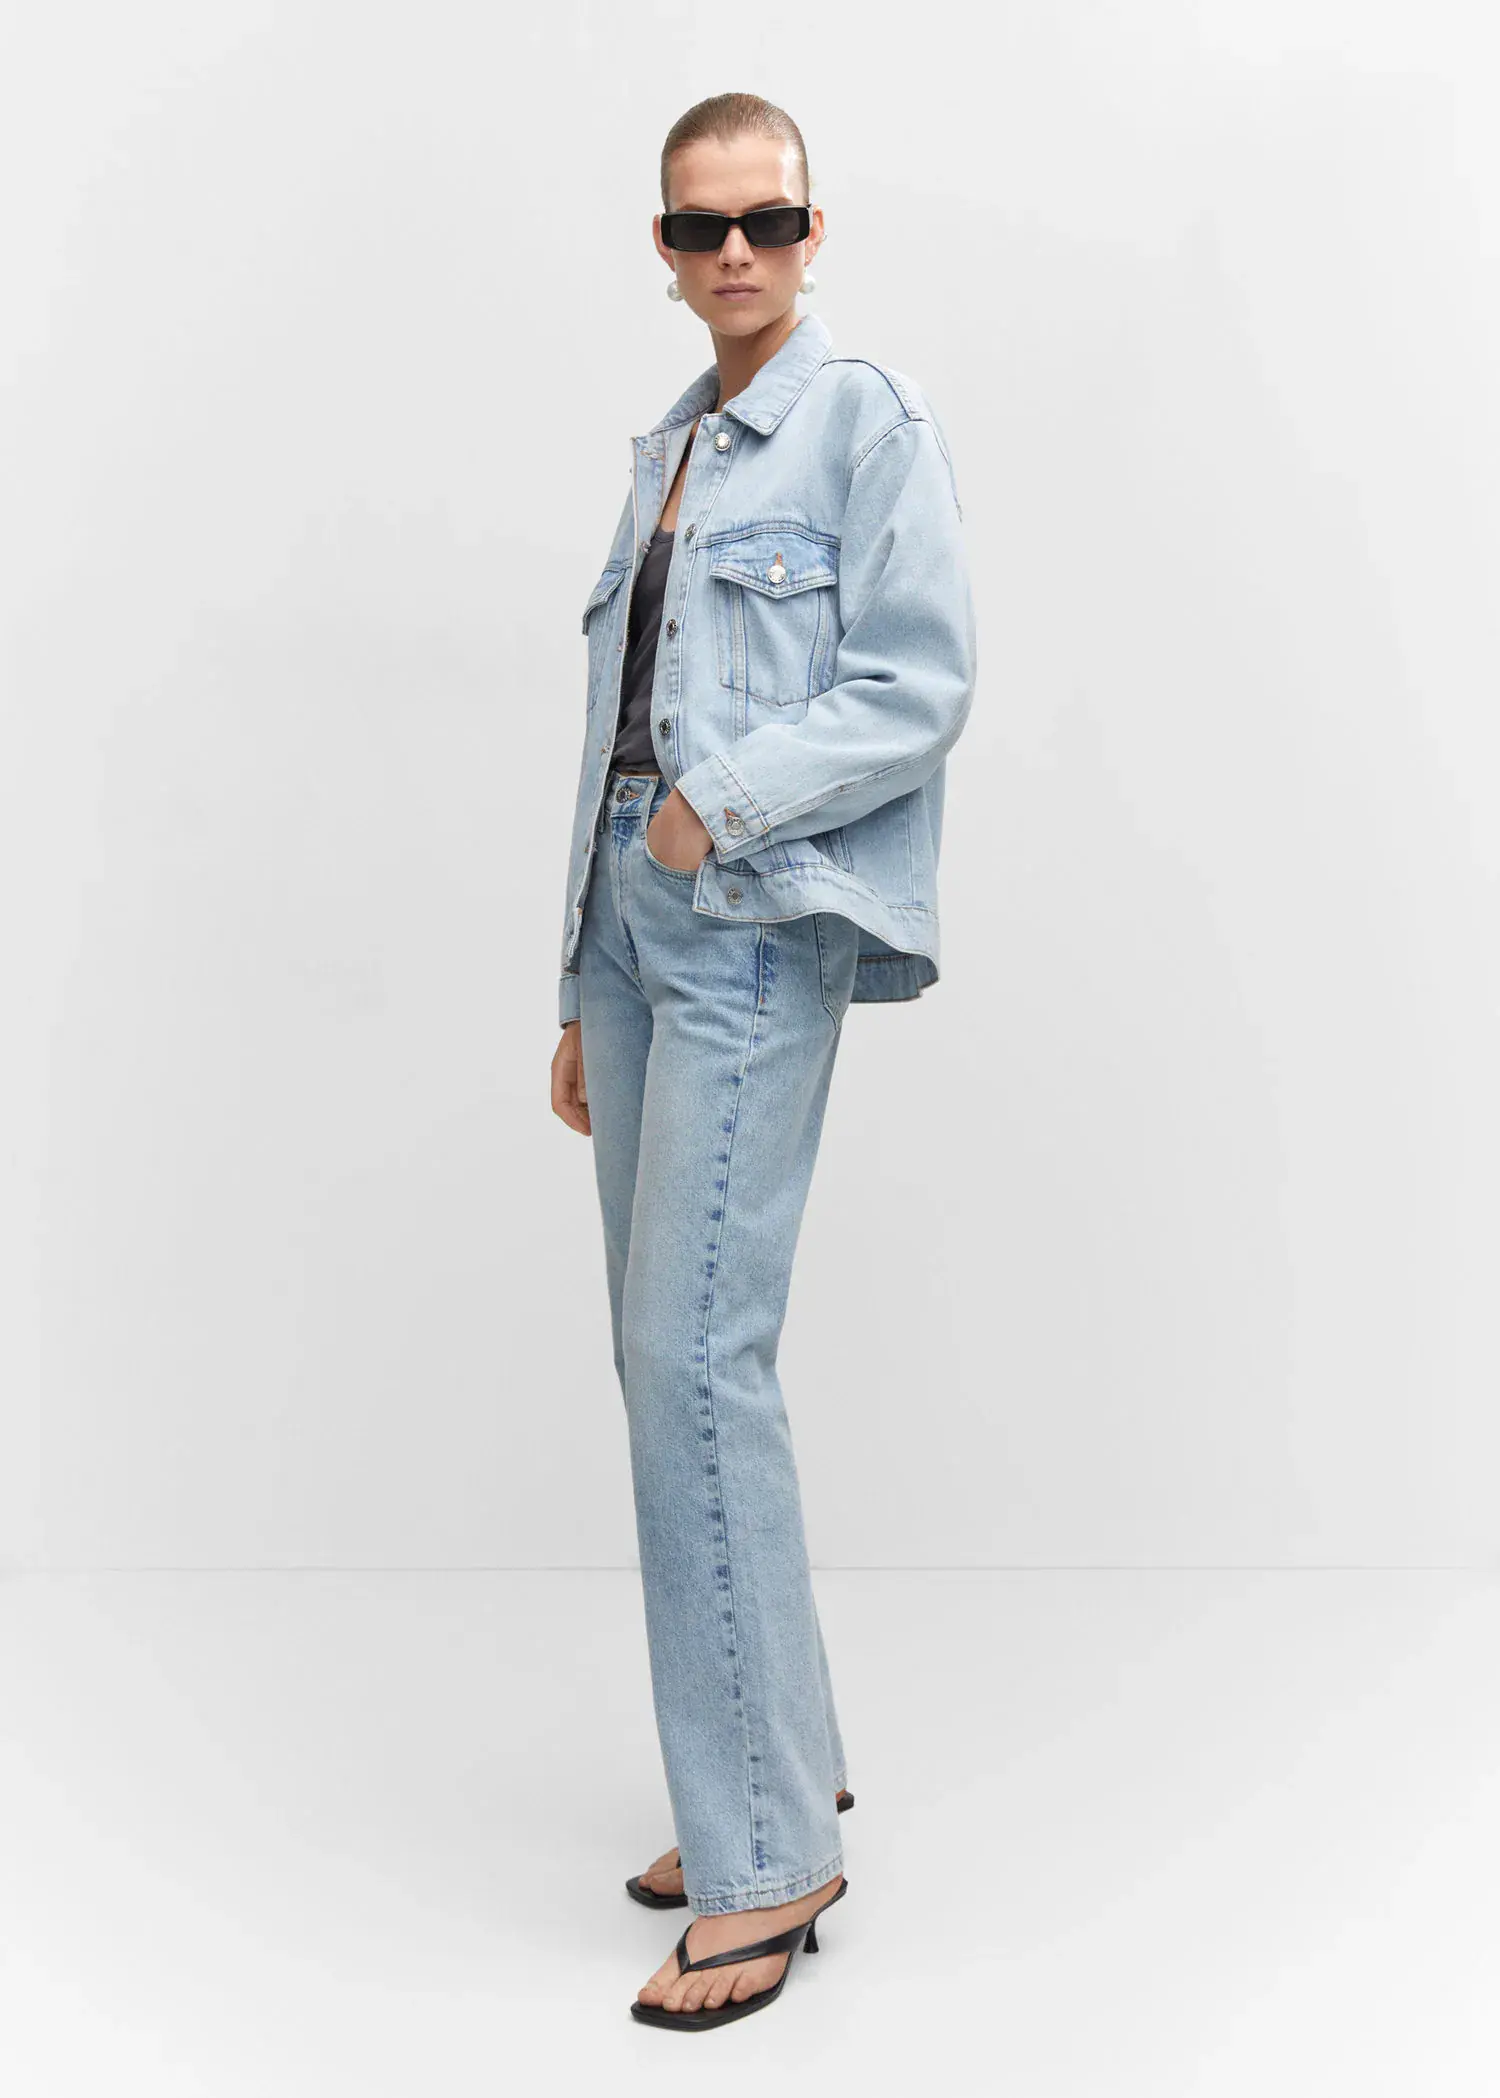 Mango Oversize denim jacket. a person standing in a room wearing a jacket. 